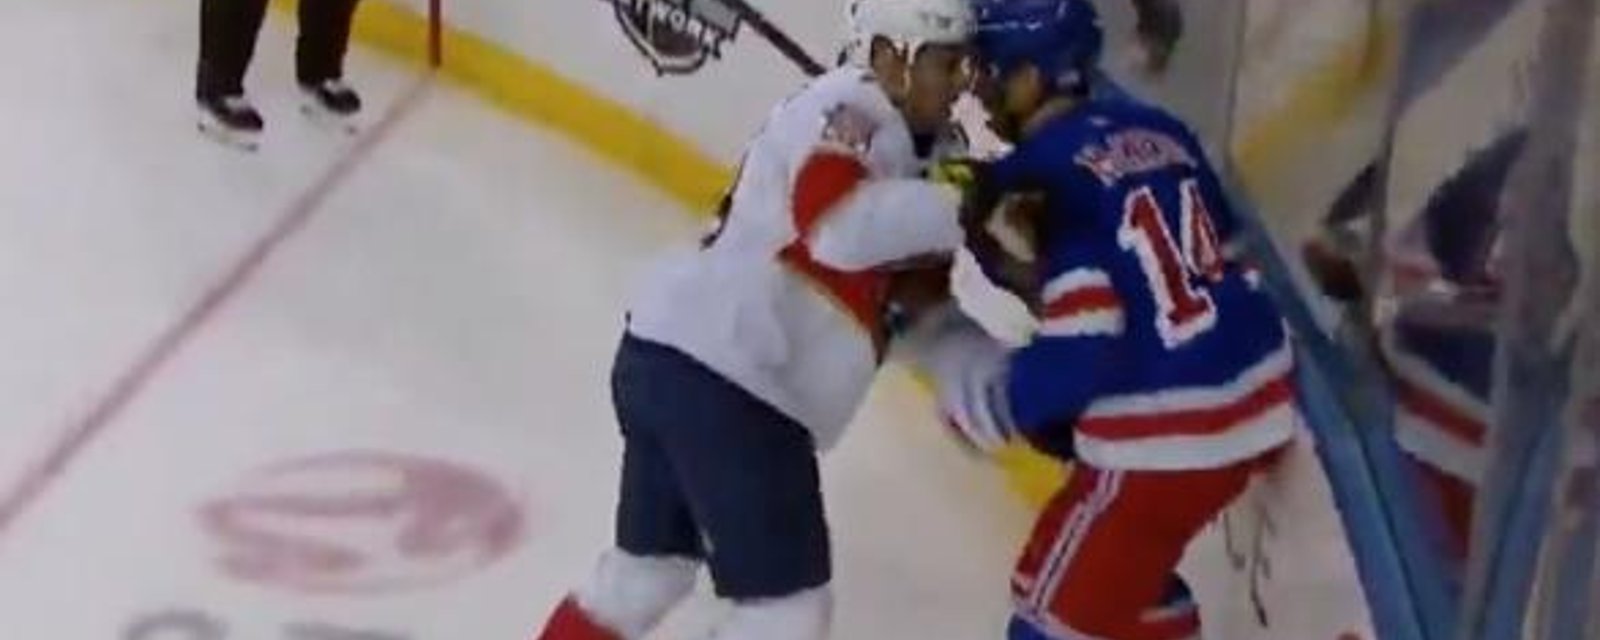 MUST SEE | Crazy goals, injuries, hits and fights in relentless Rangers-Panthers matchup